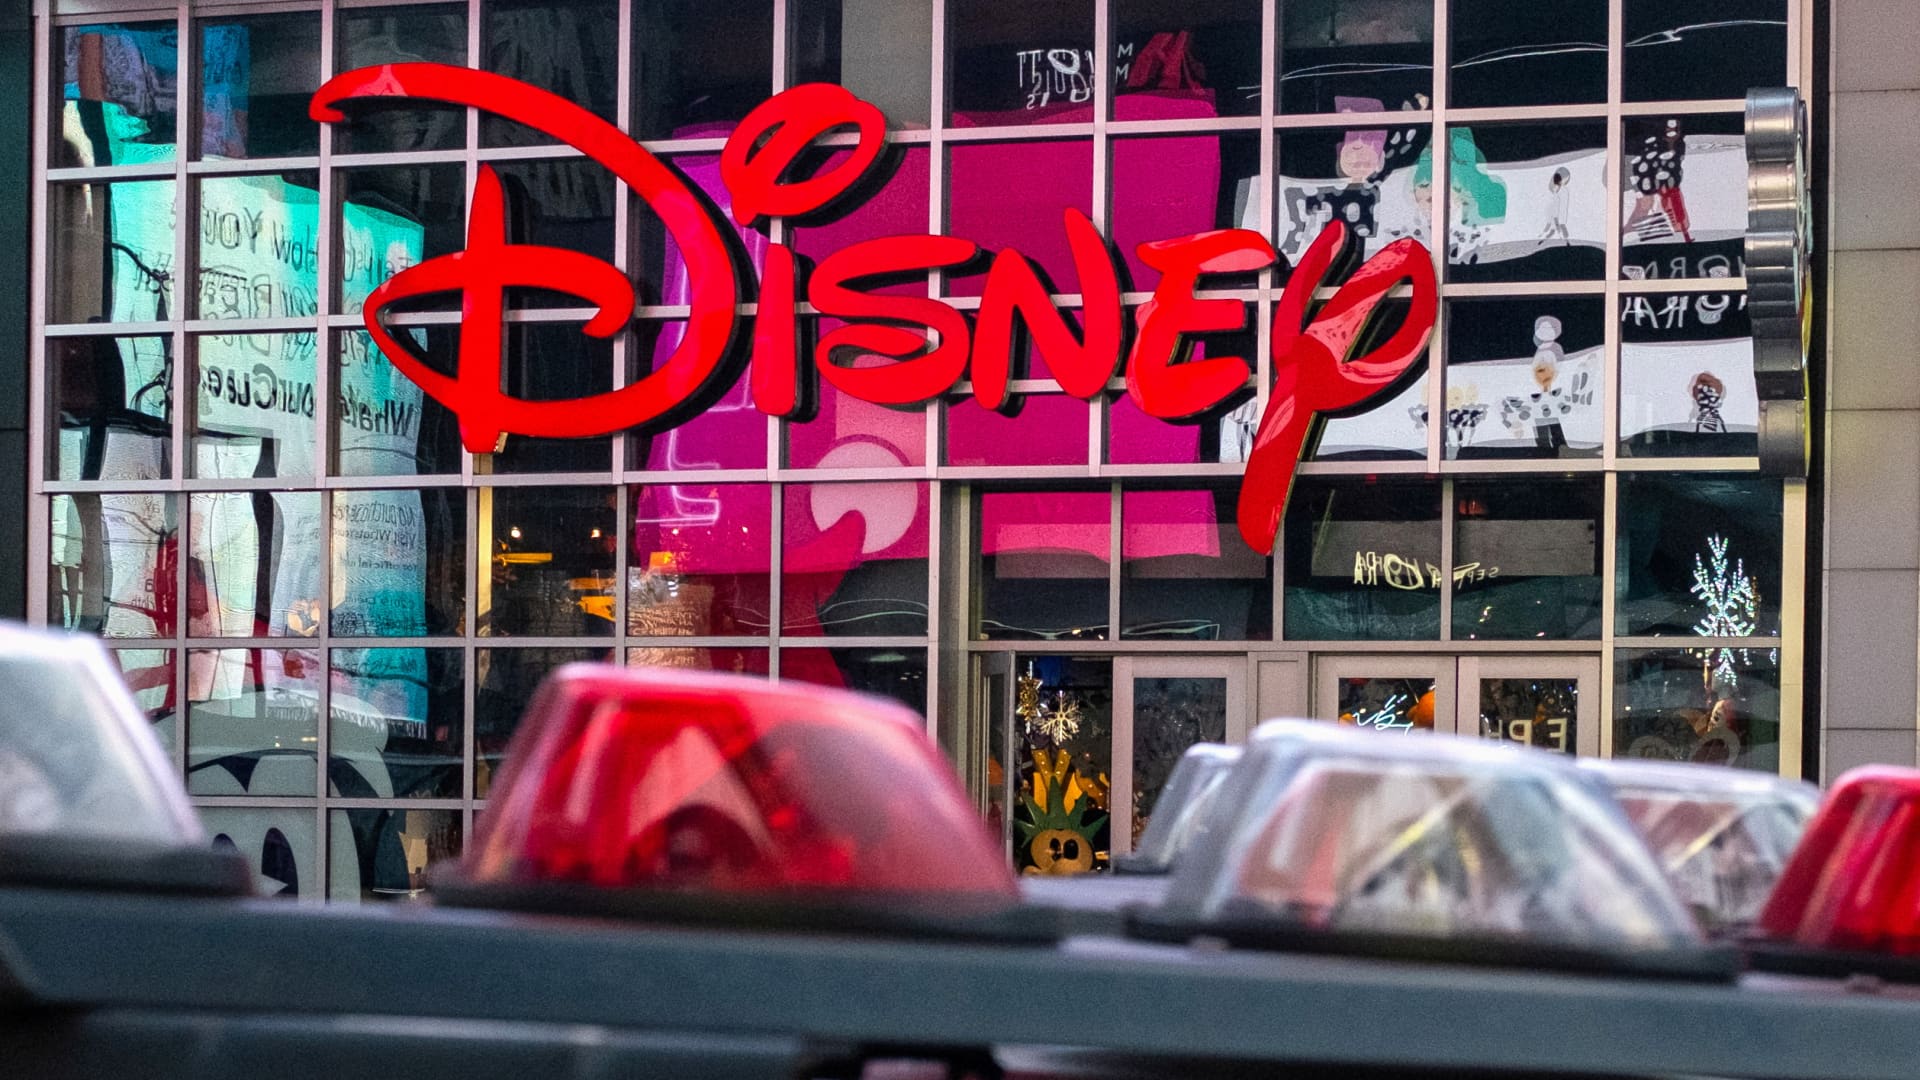 Stocks making the biggest moves after hours: Disney, Bumble, Sonos & more